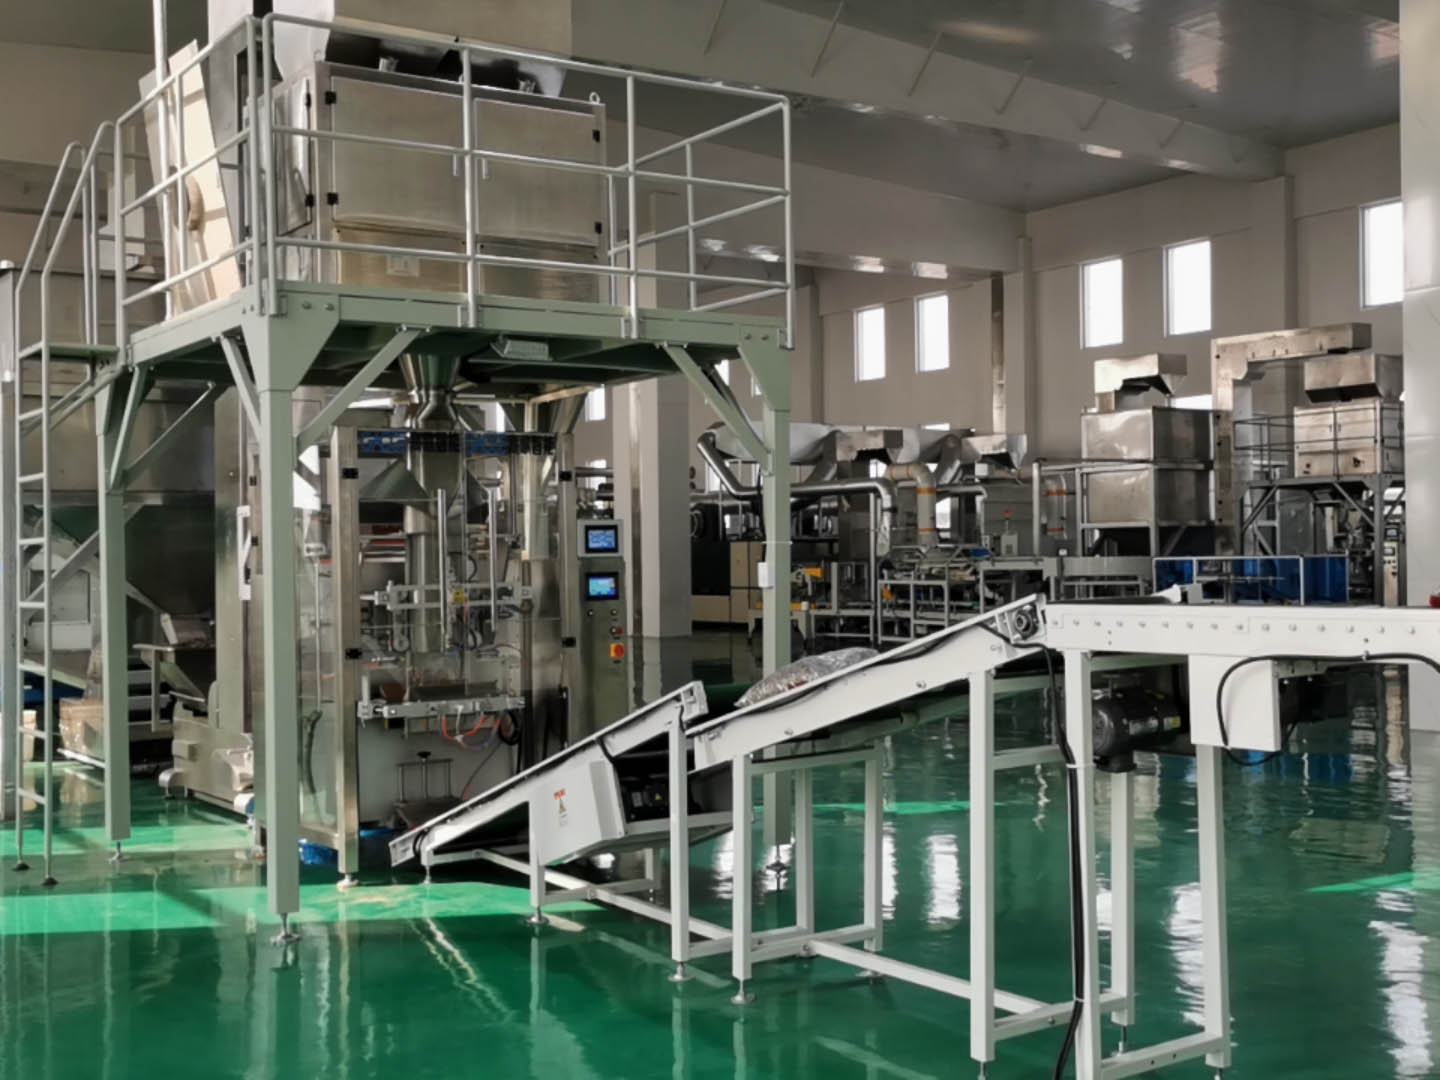 Vffs Packaging Machine & Bag in Box & The Turn-arm Robot Palletizer Packaging Line